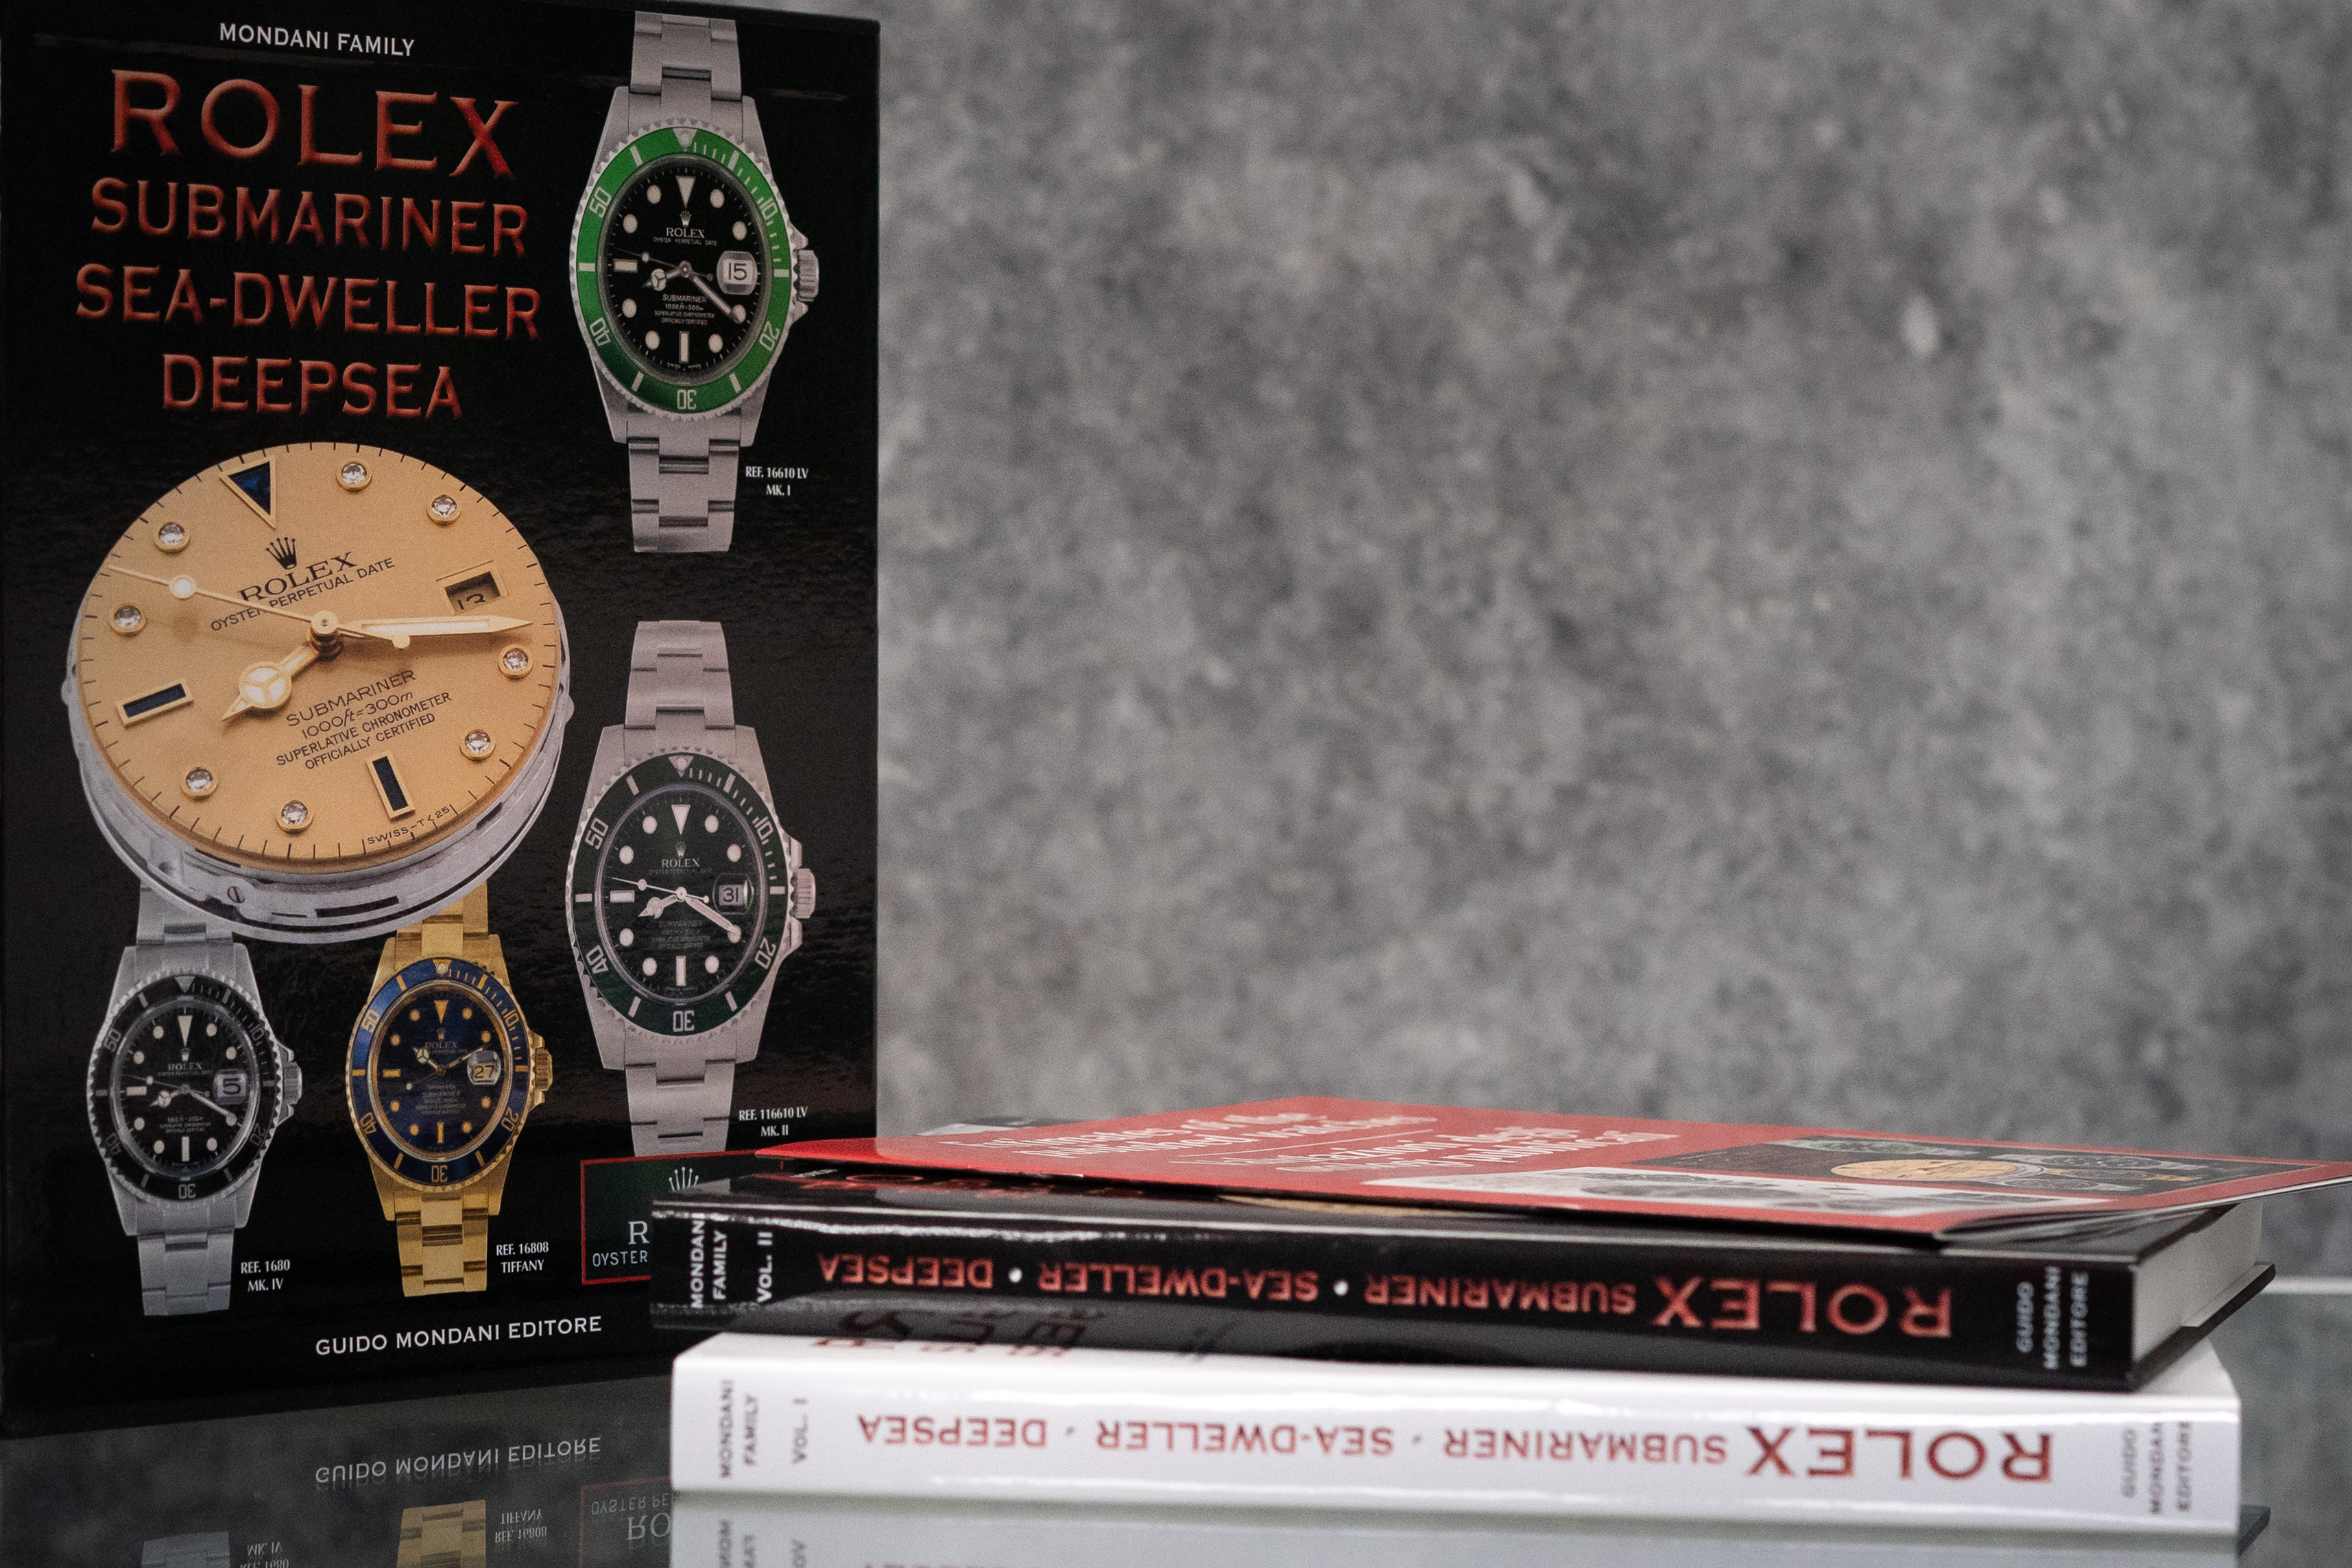 "ROLEX SUBMARINER SEA-DWELLER DEEPSEA"_ BY GUIDO MONDANI_WITH A BOOK FOR FREE 